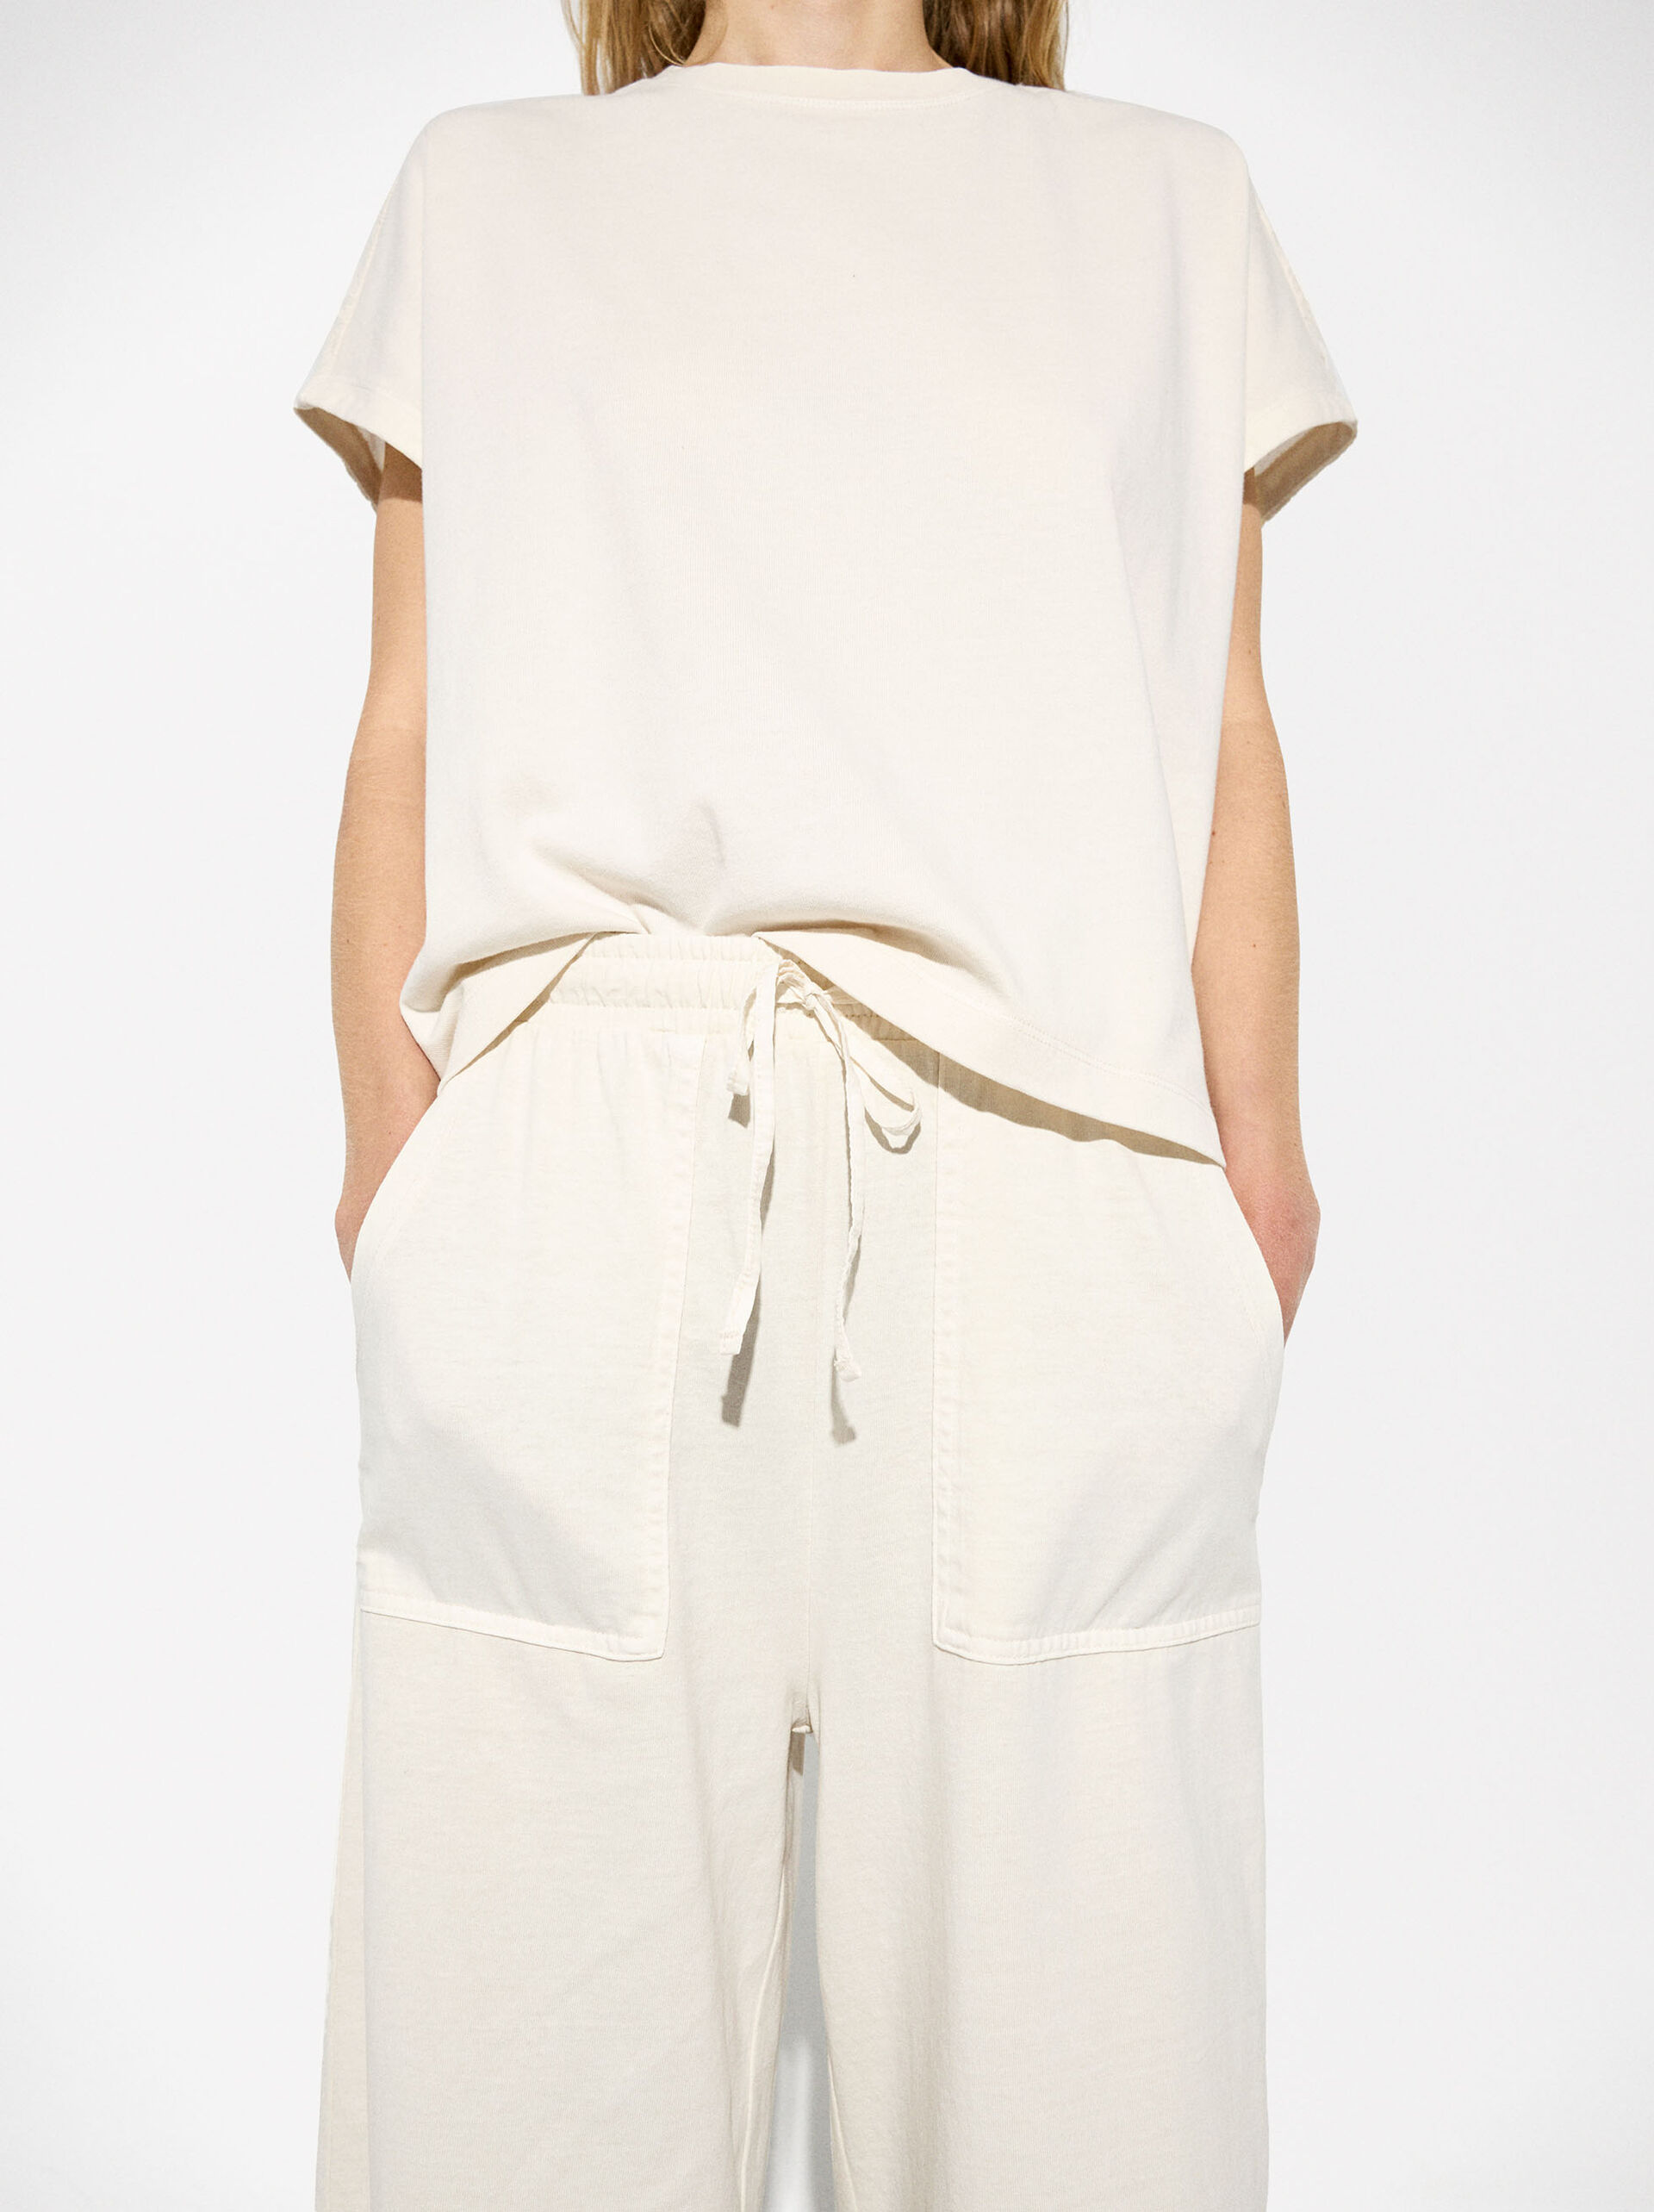 Cotton Trousers With Pockets image number 4.0